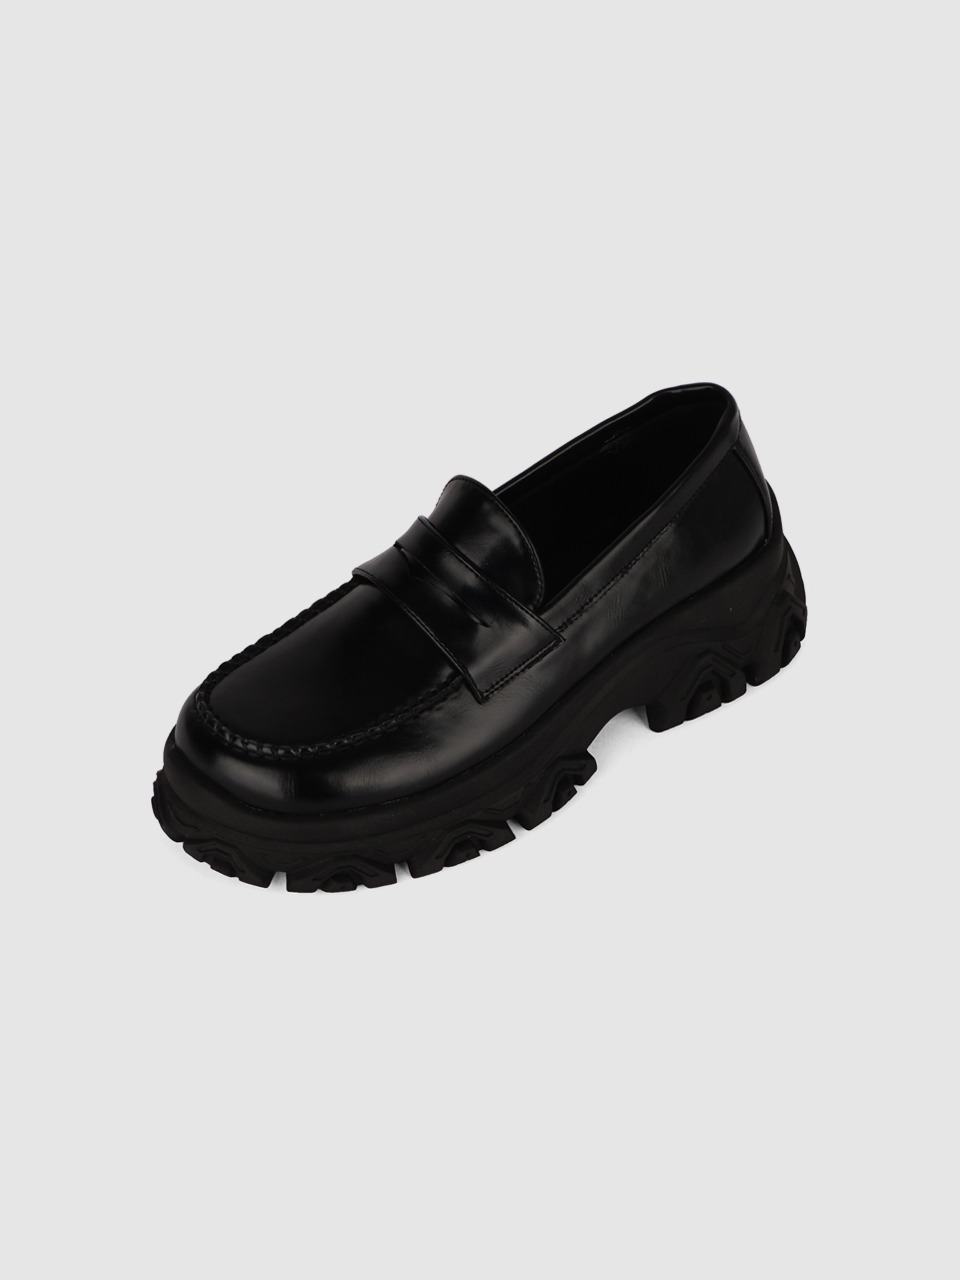 Rough Penny Loafer